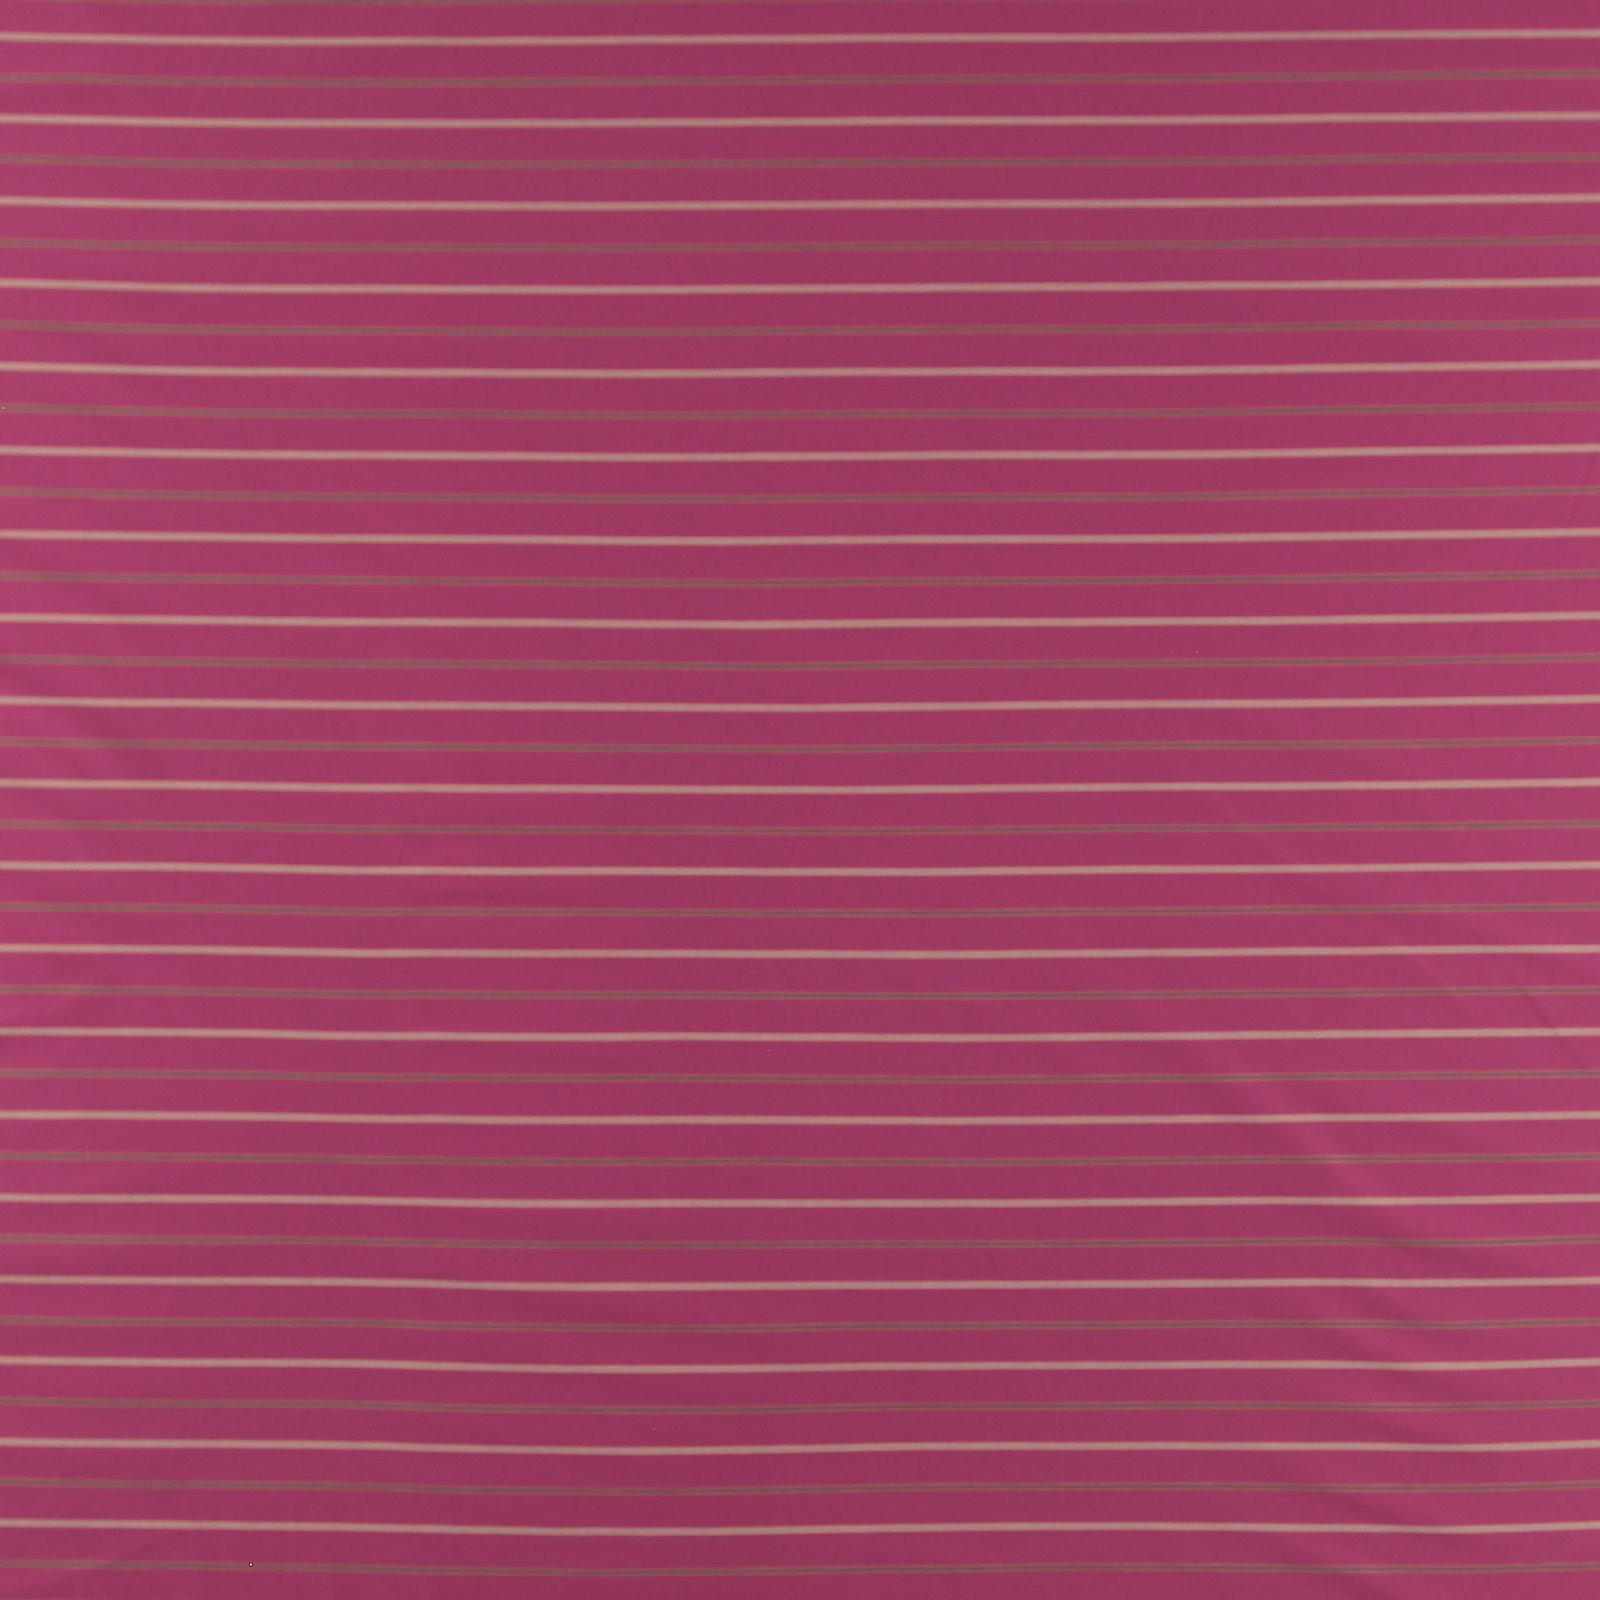 Woven cotton w stretch pink YD stripes 501987_pack_sp